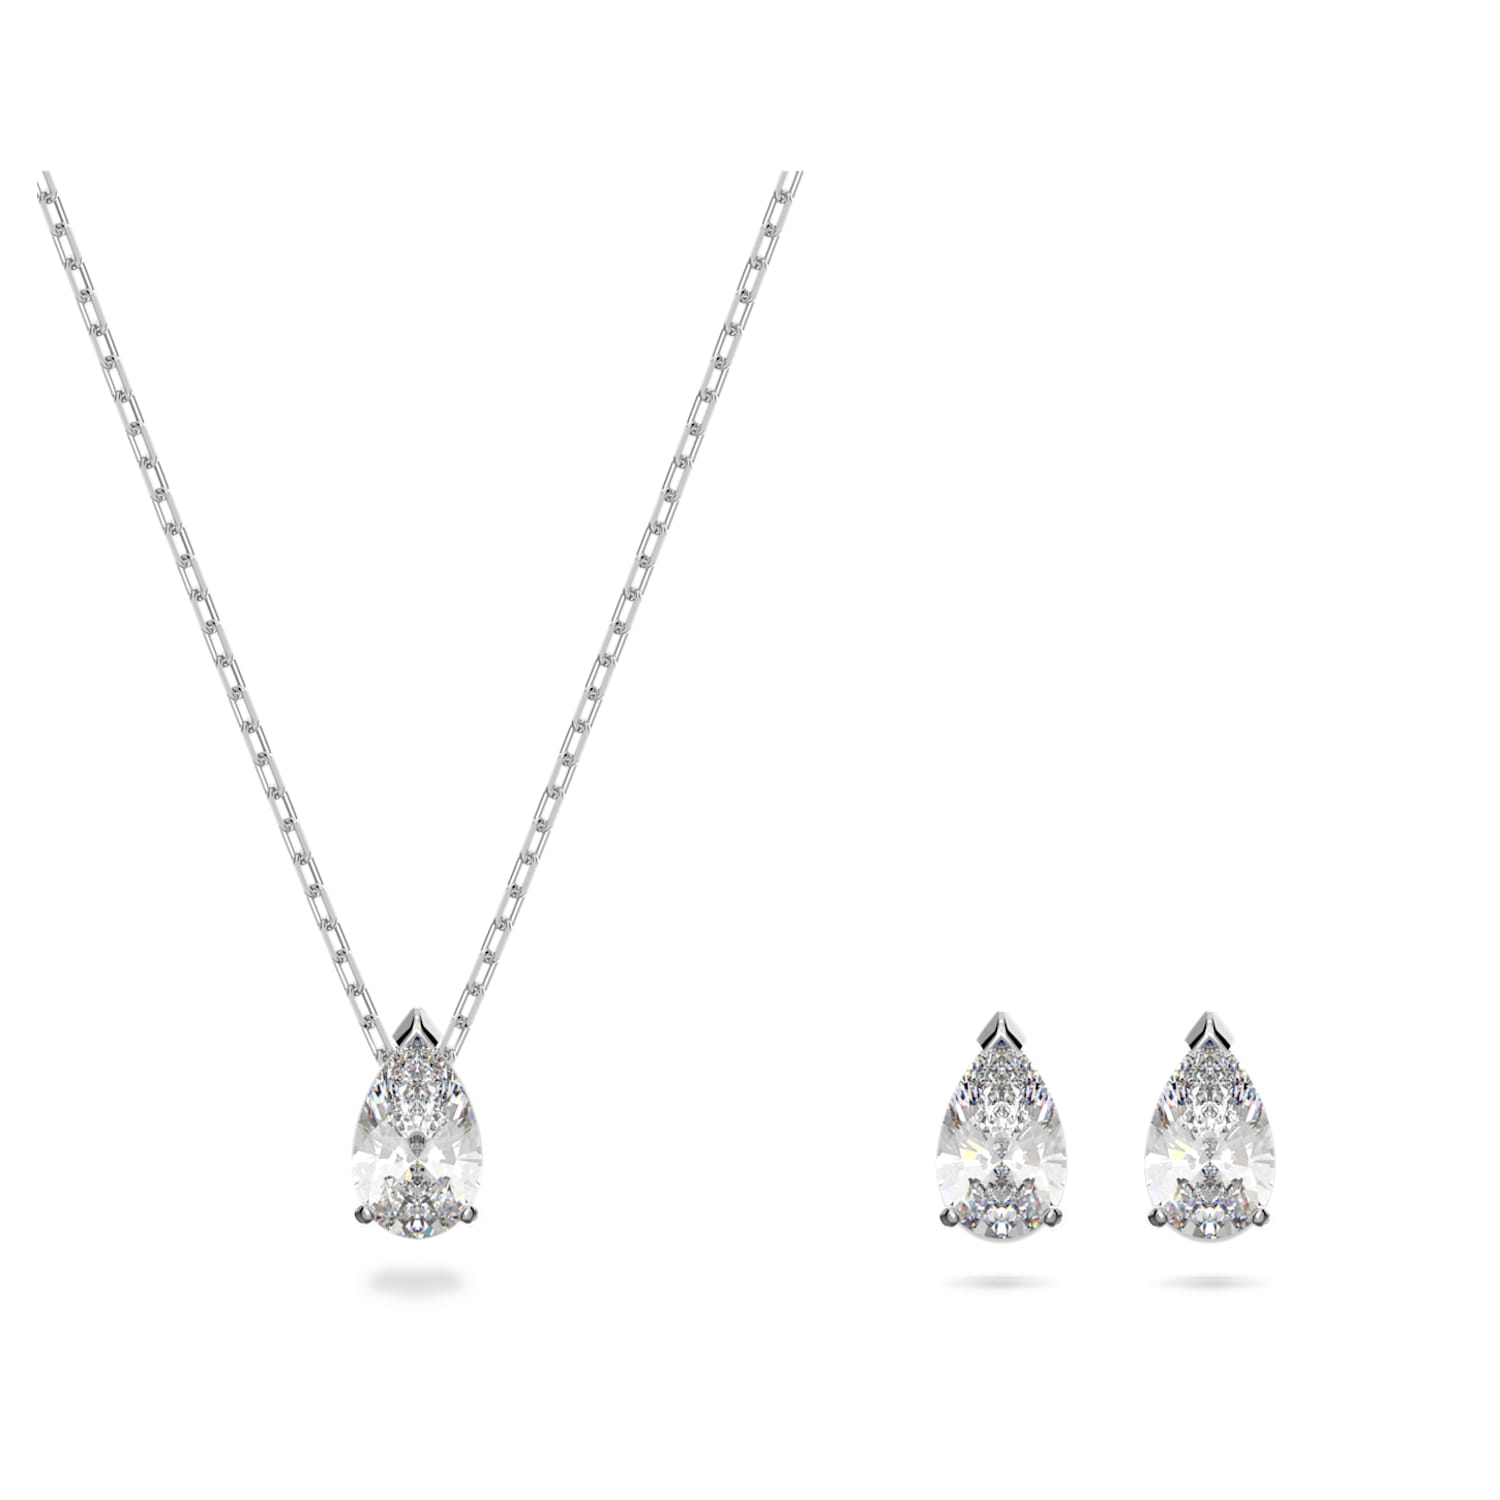 Attract set, Pear cut crystal, White, Rhodium plated